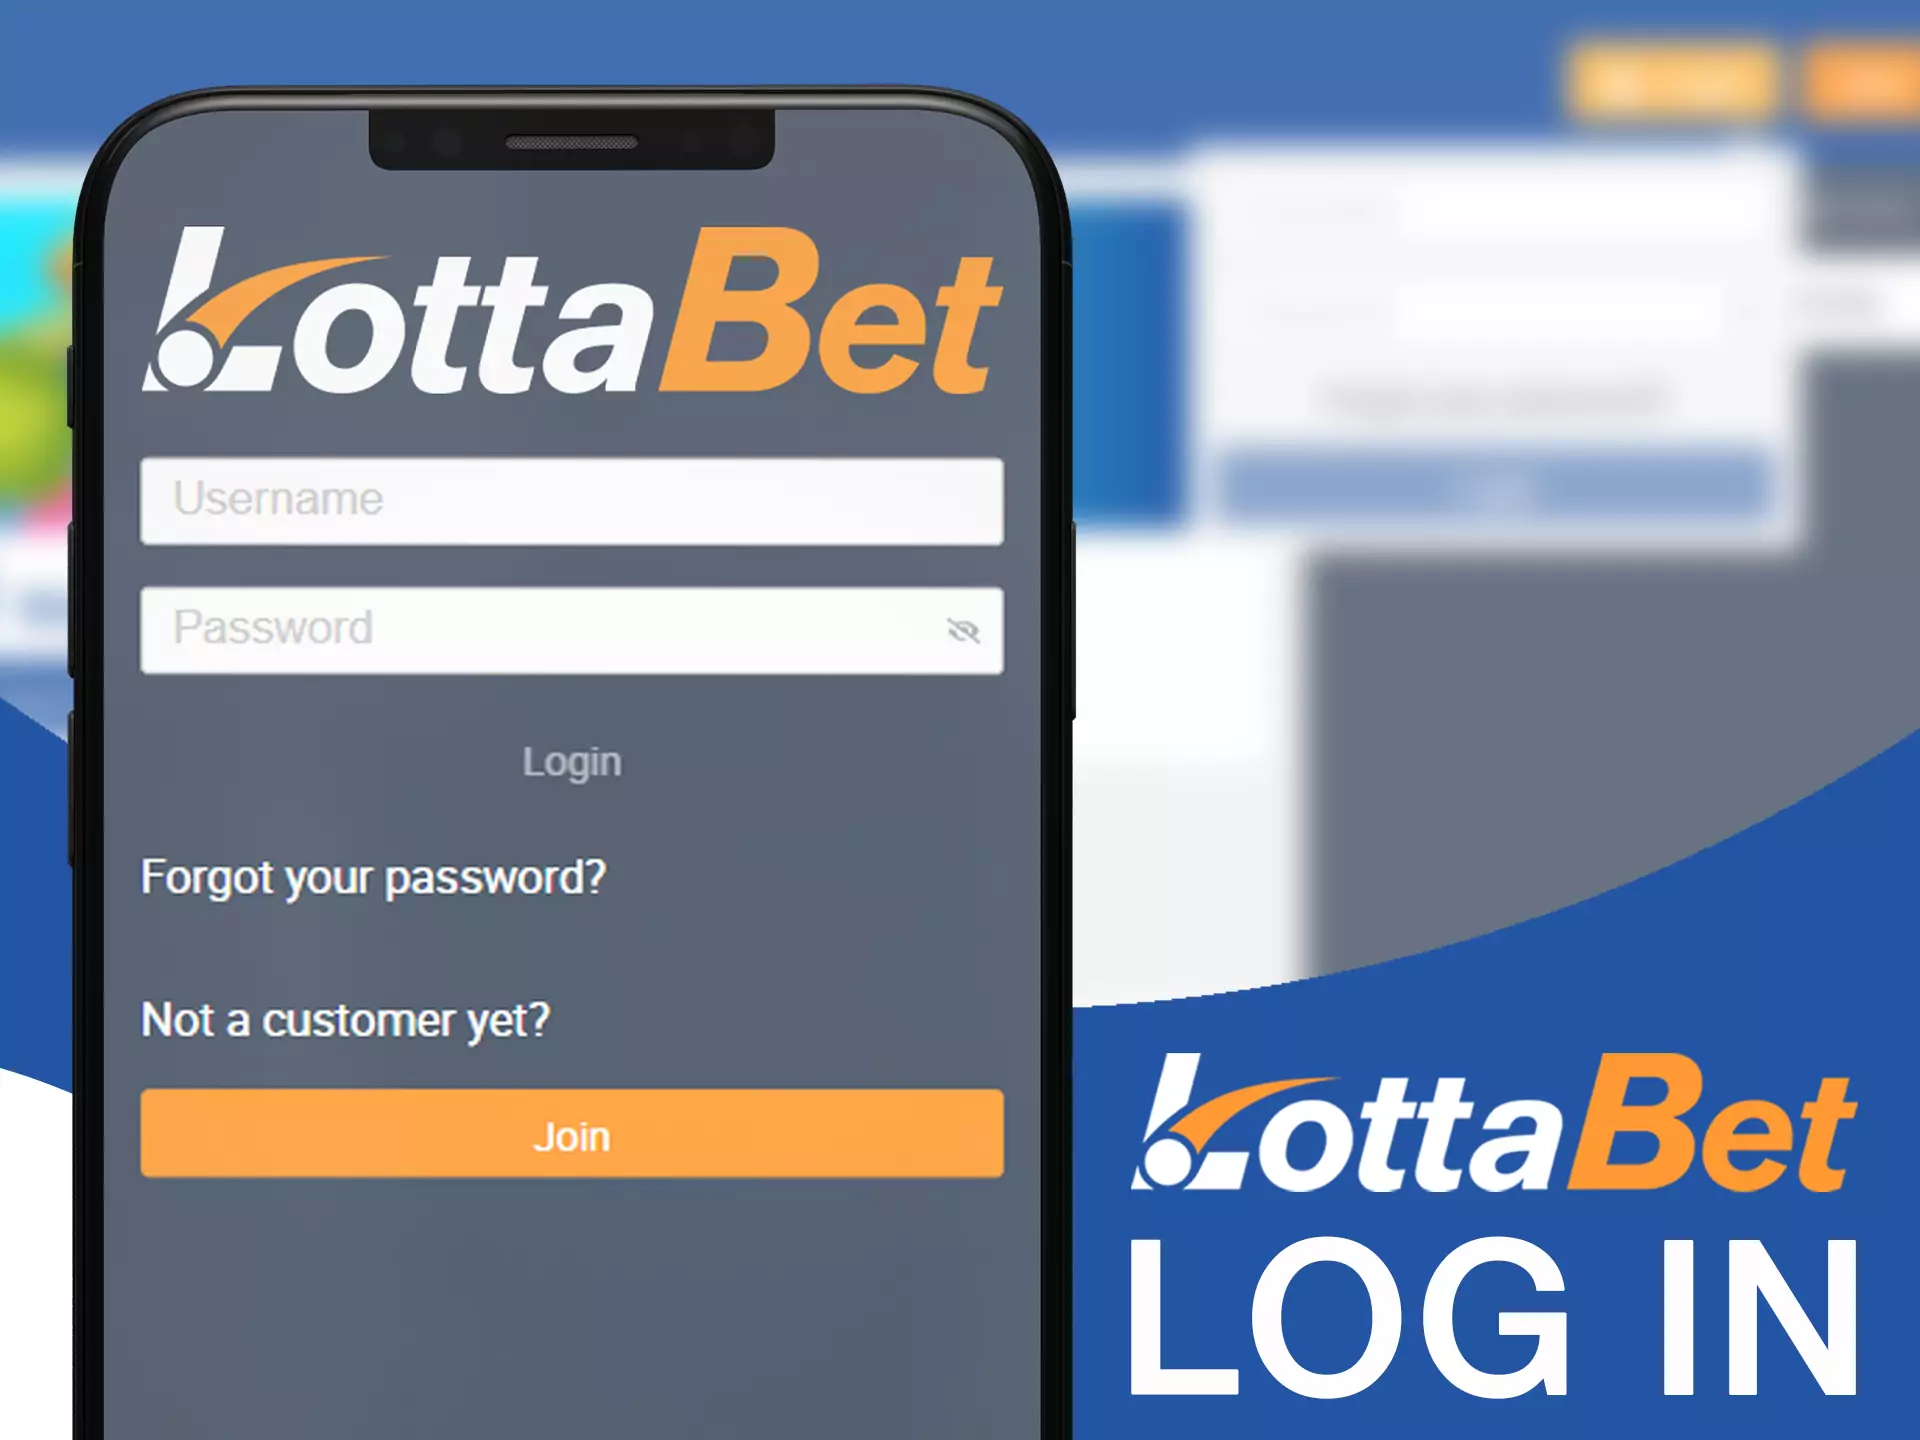 Log in to the LottaBet app to start betting.